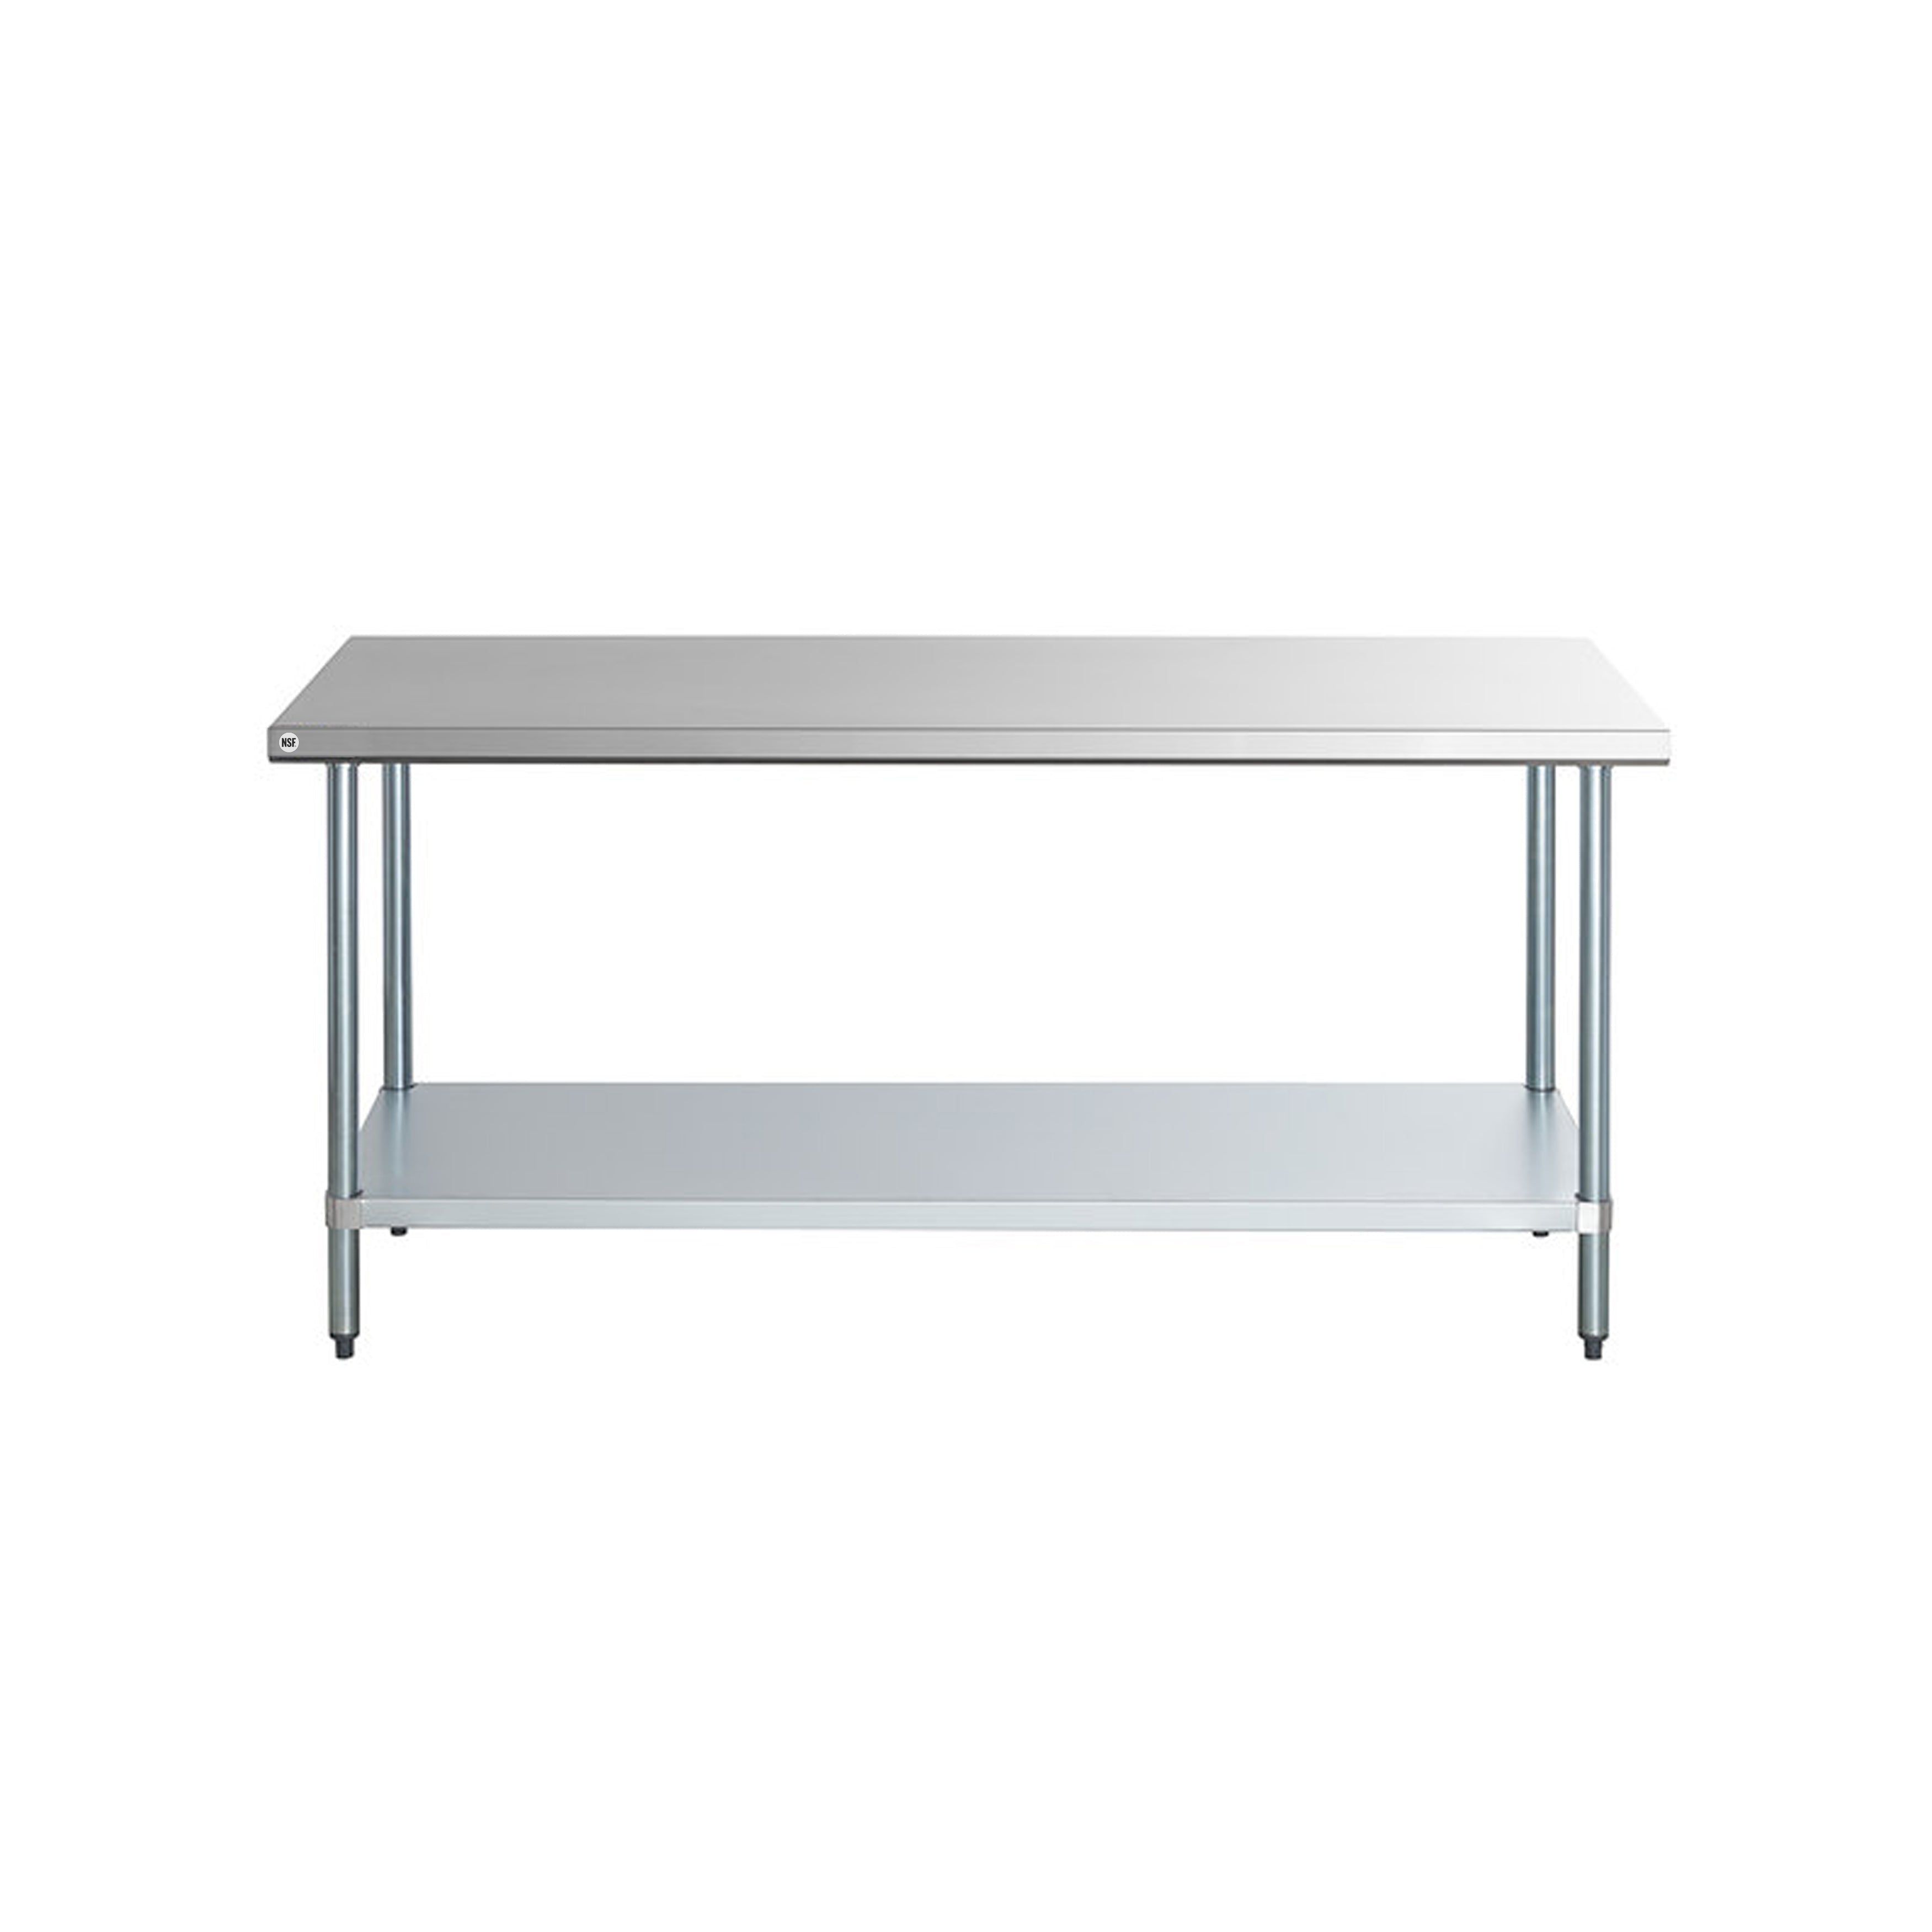 Omcan - 19140, Commercial 24" x 72" Stainless Steel Kitchen Work Table 1200lbs Heavy Duty